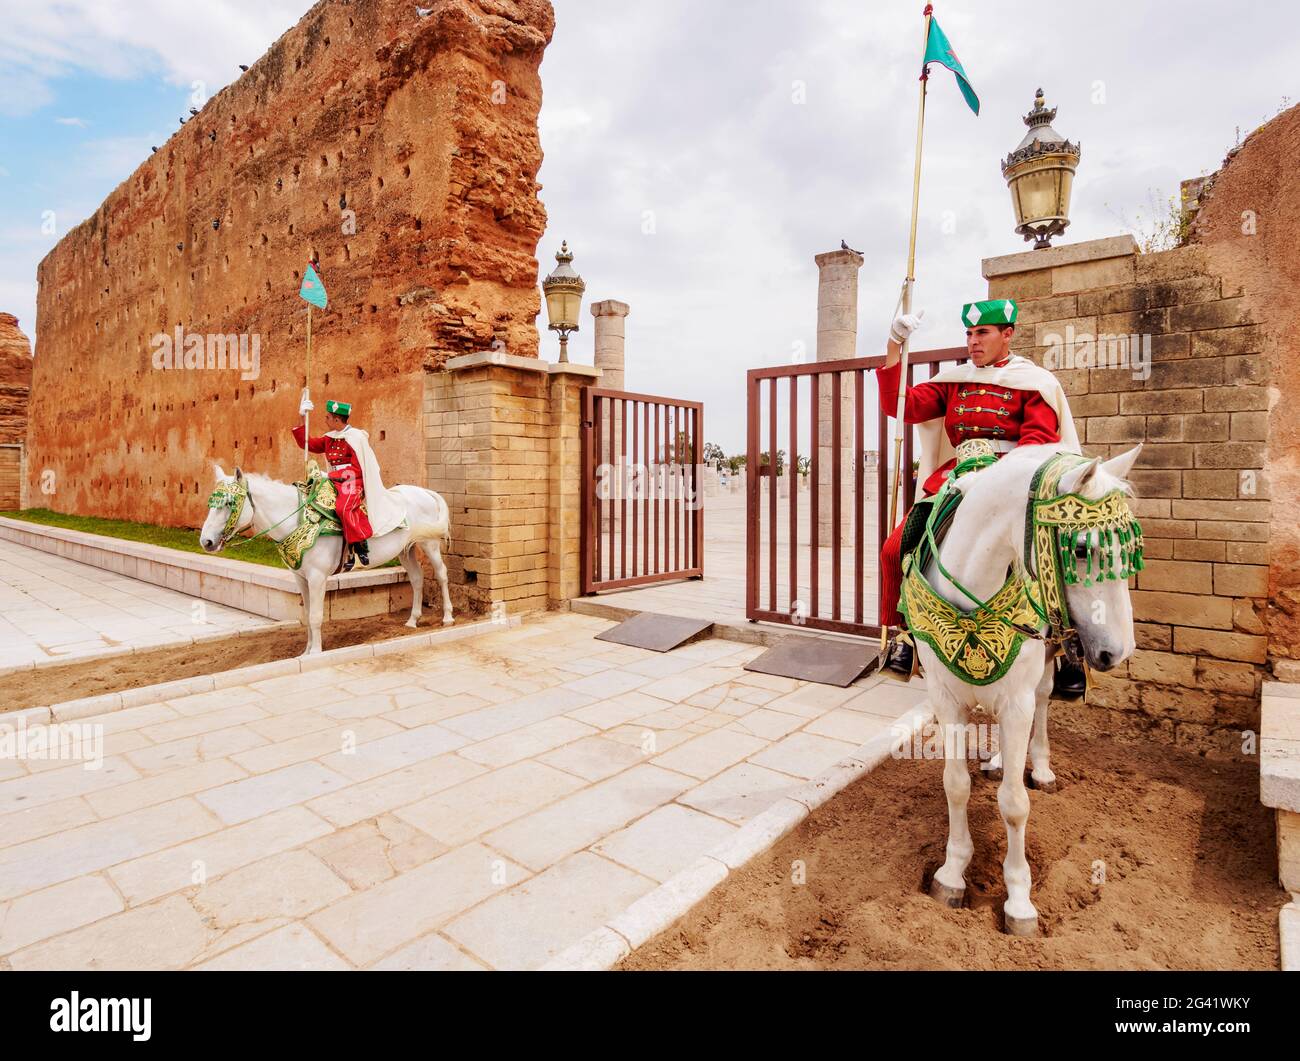 Royal guards on horses in front of the Hassan Tower and Mausoleum of Mohammed V, Rabat, Rabat-Sale-Kenitra Region, Morocco Stock Photo